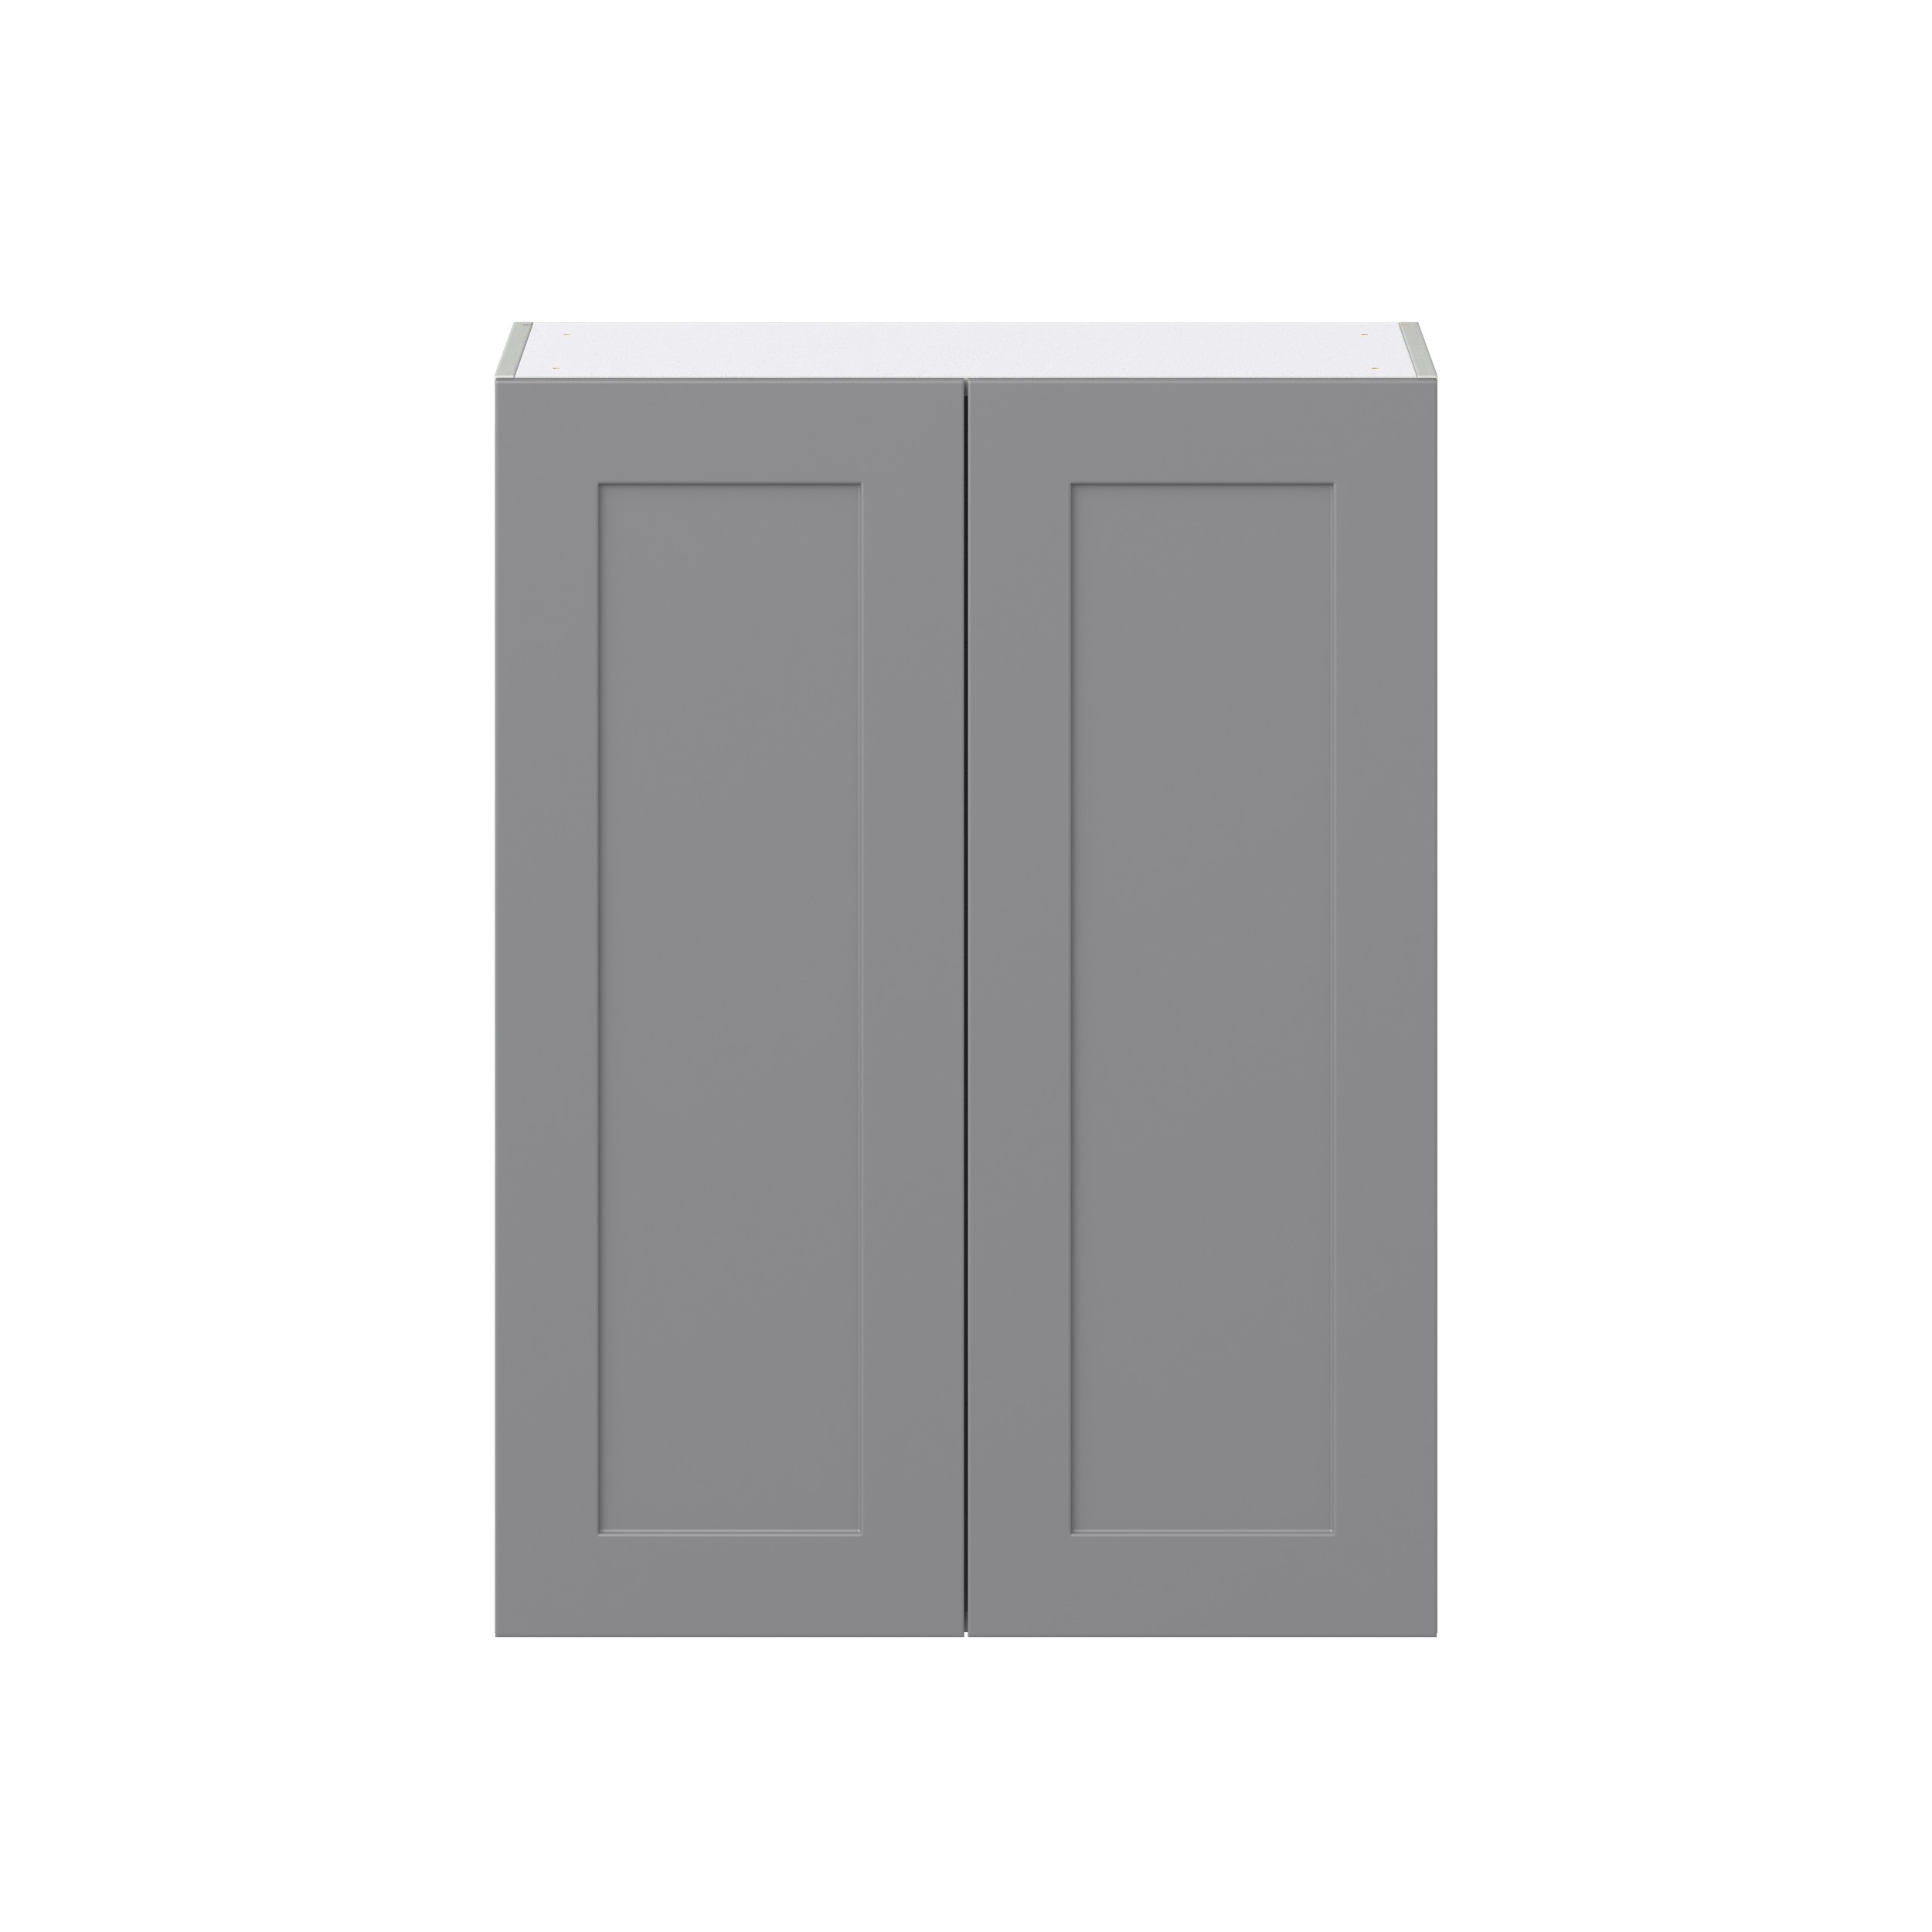 Willow Painted Slate Gray Shaker Assembled Wall Cabinet with 2 Full High Doors (30 in. W x 40 in. H x 14 in. D)